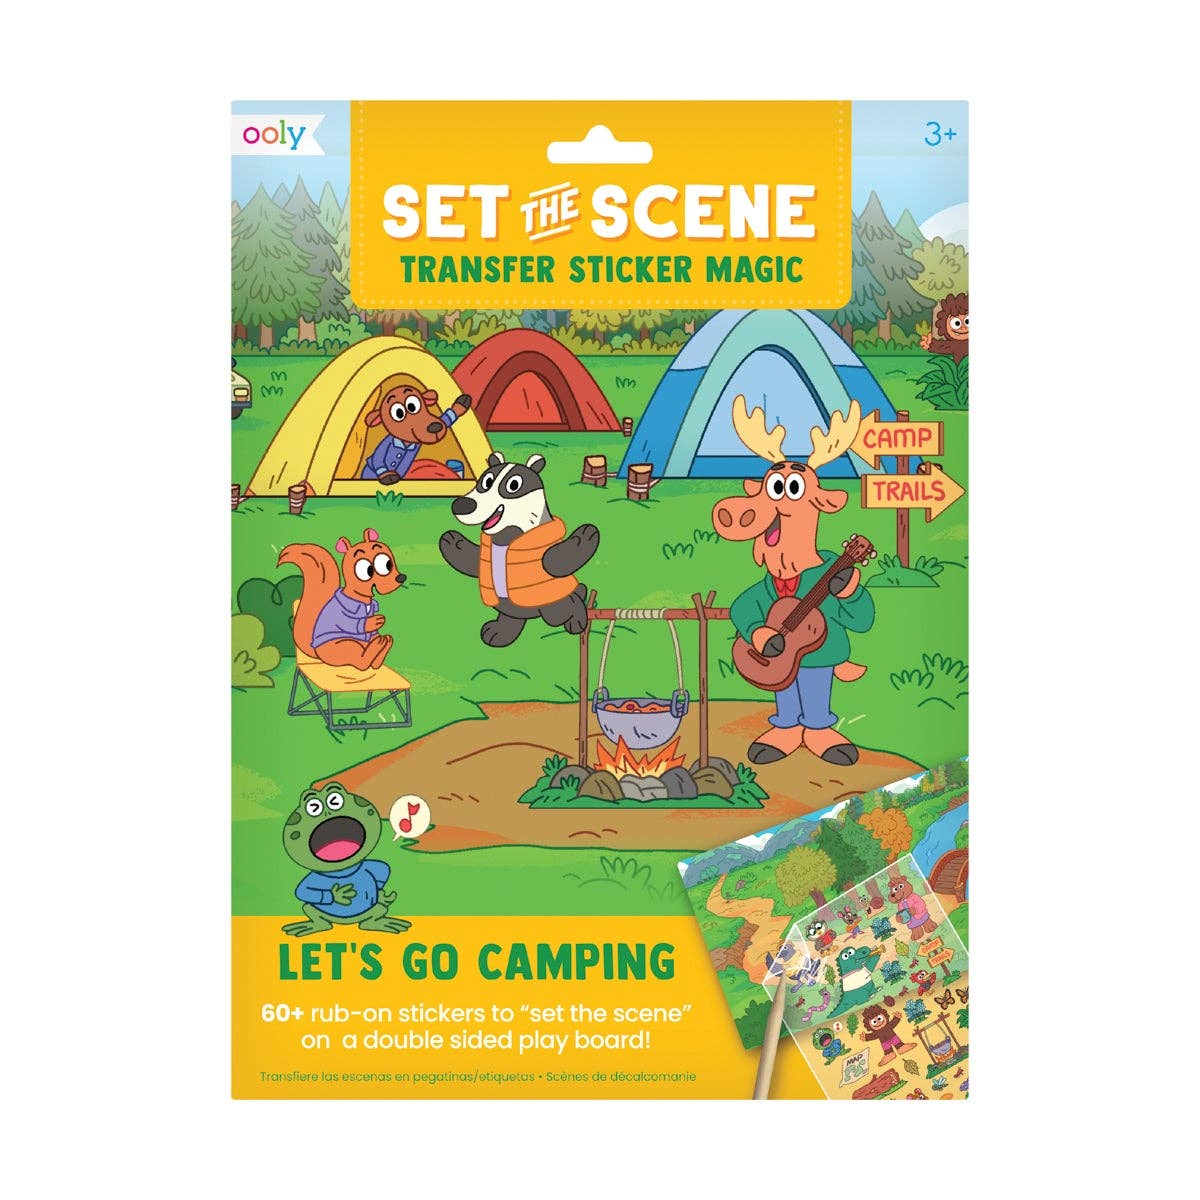 Set The Scene Transfer Stickers Magic - Let's Go Camping